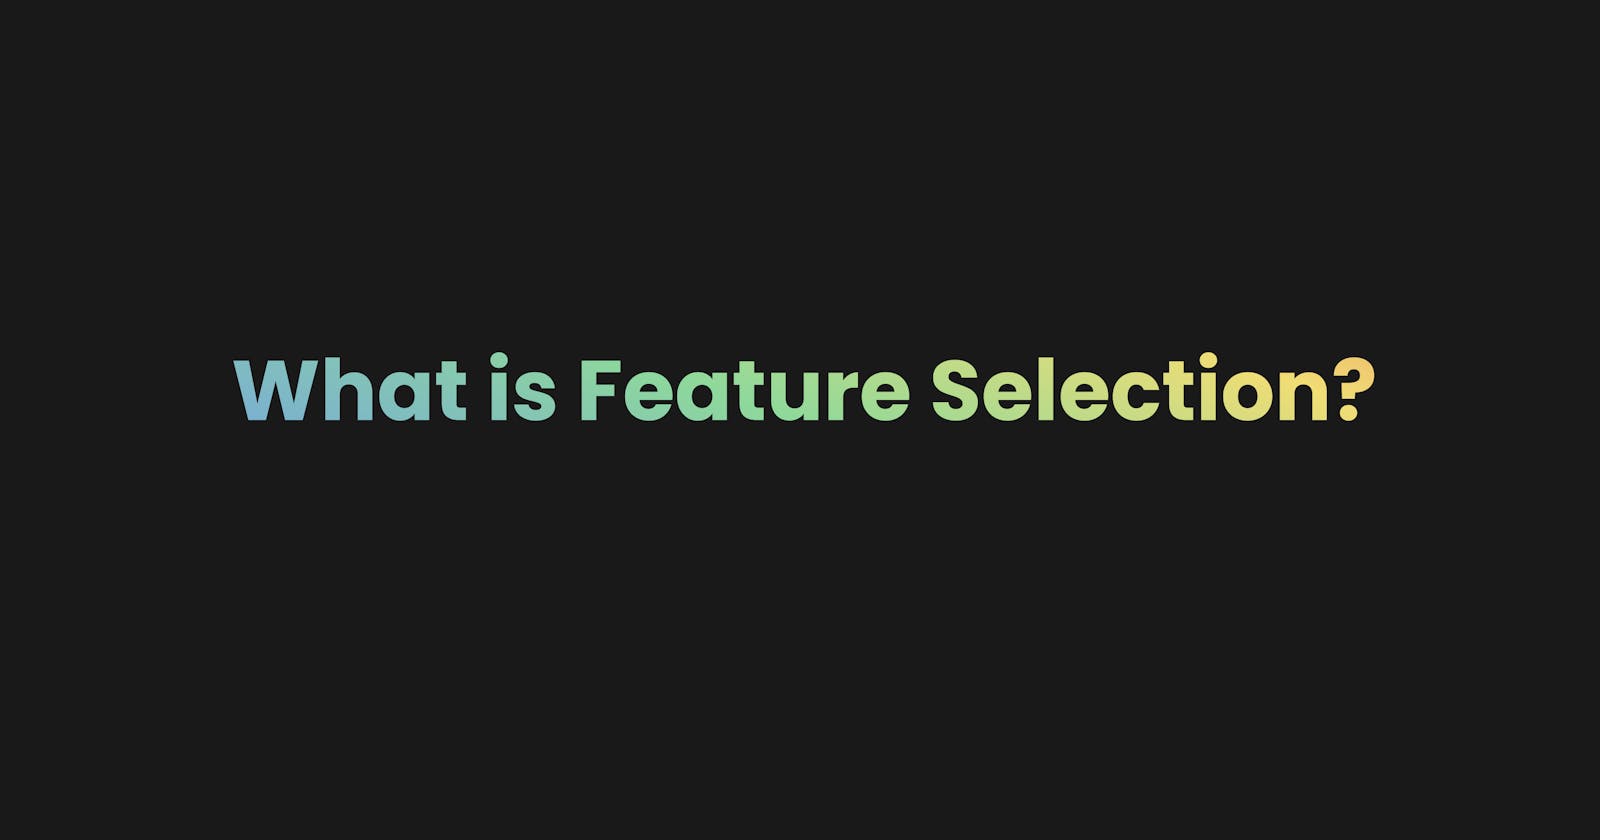 What is Feature Selection?